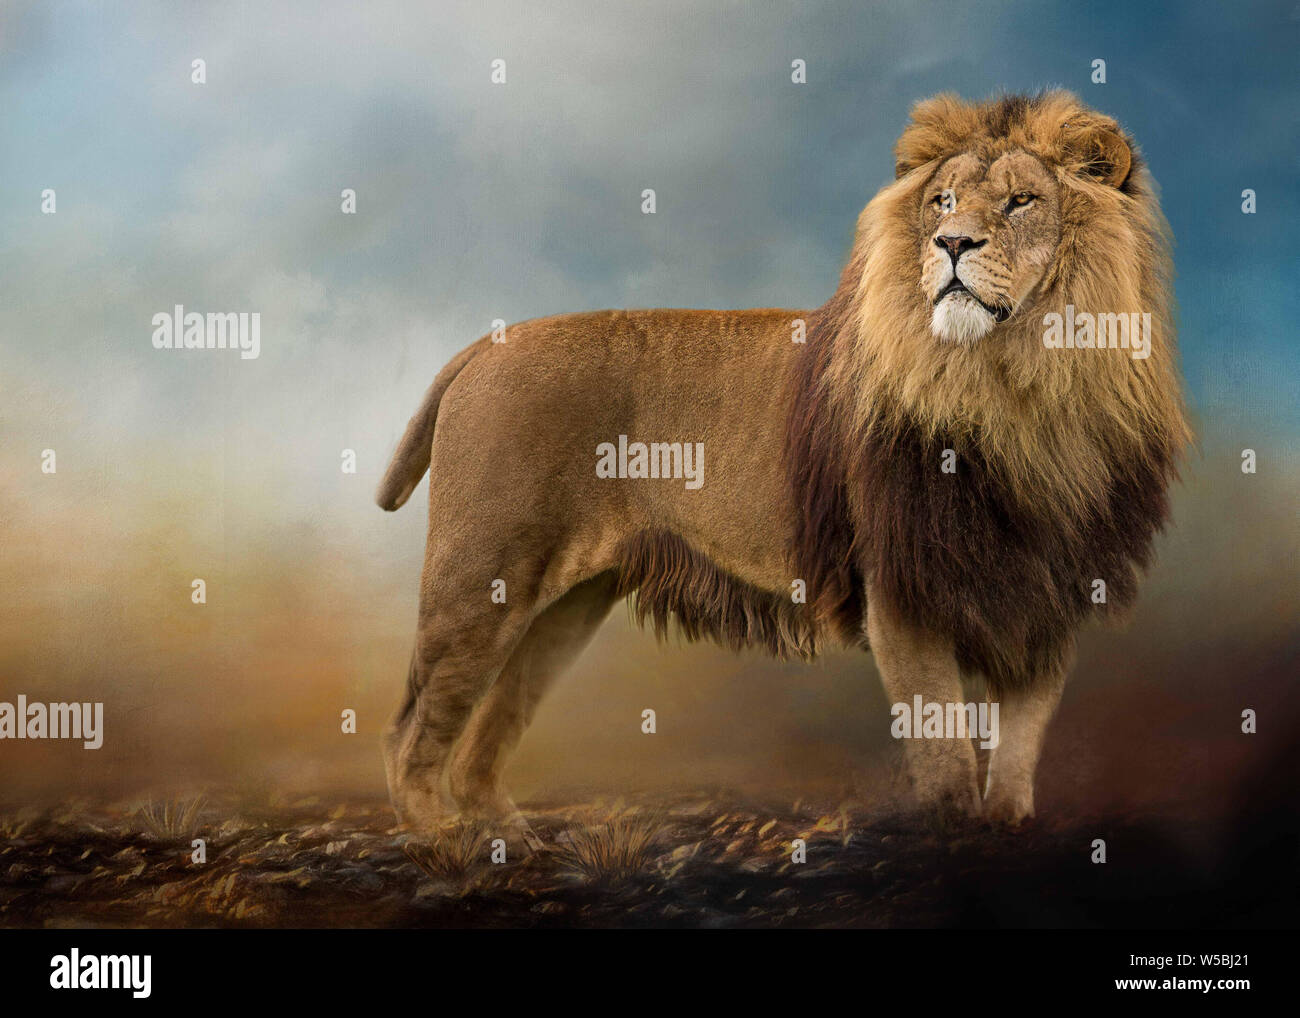 Male Lion standing proud showing a side view of body but front of face with full mane set on a textured painterly background with room to add text Stock Photo